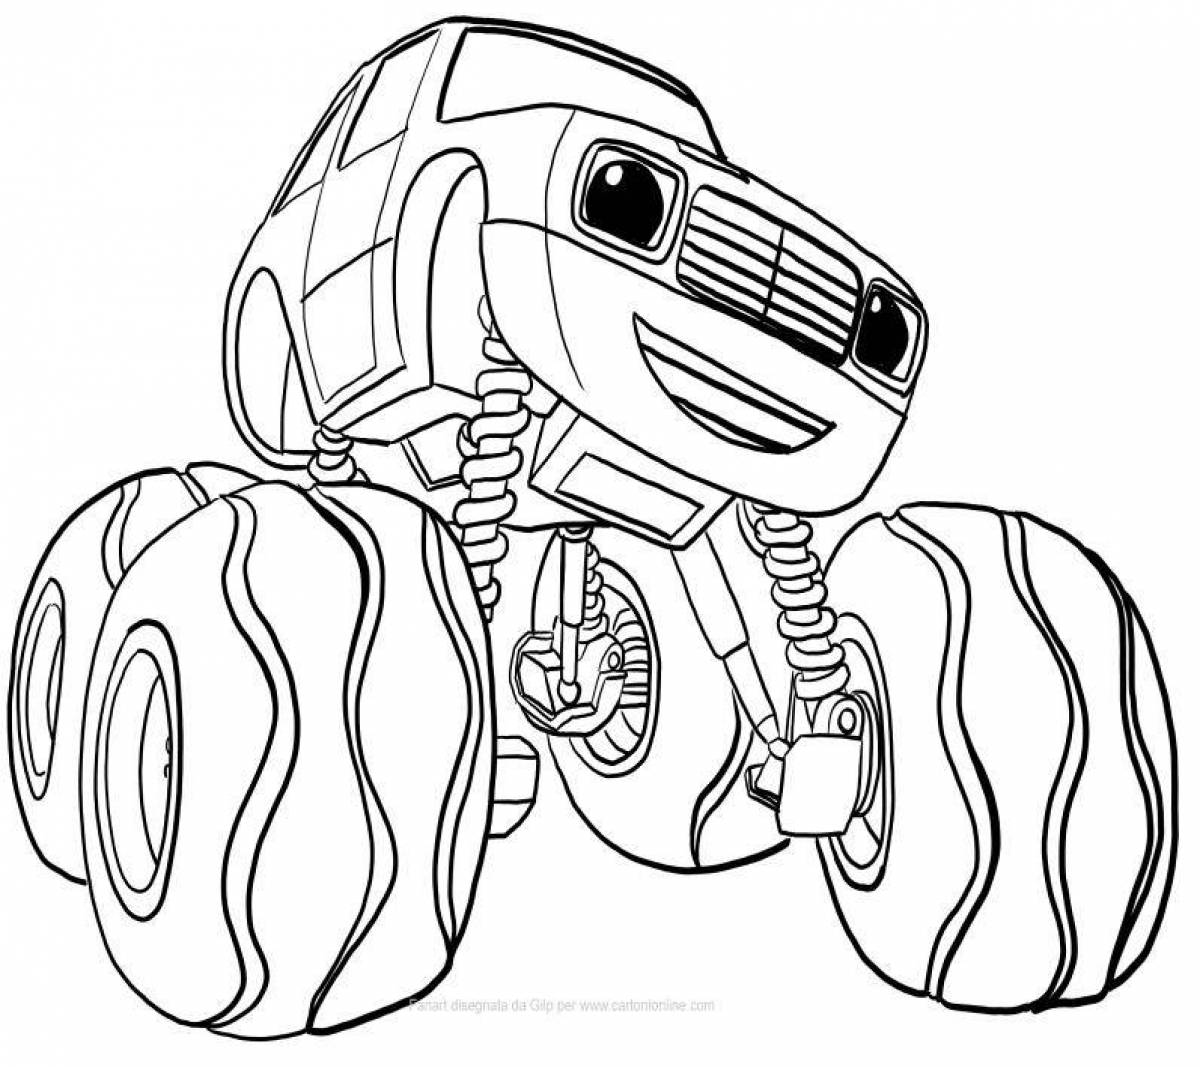 Coloring page amazing wonder cars